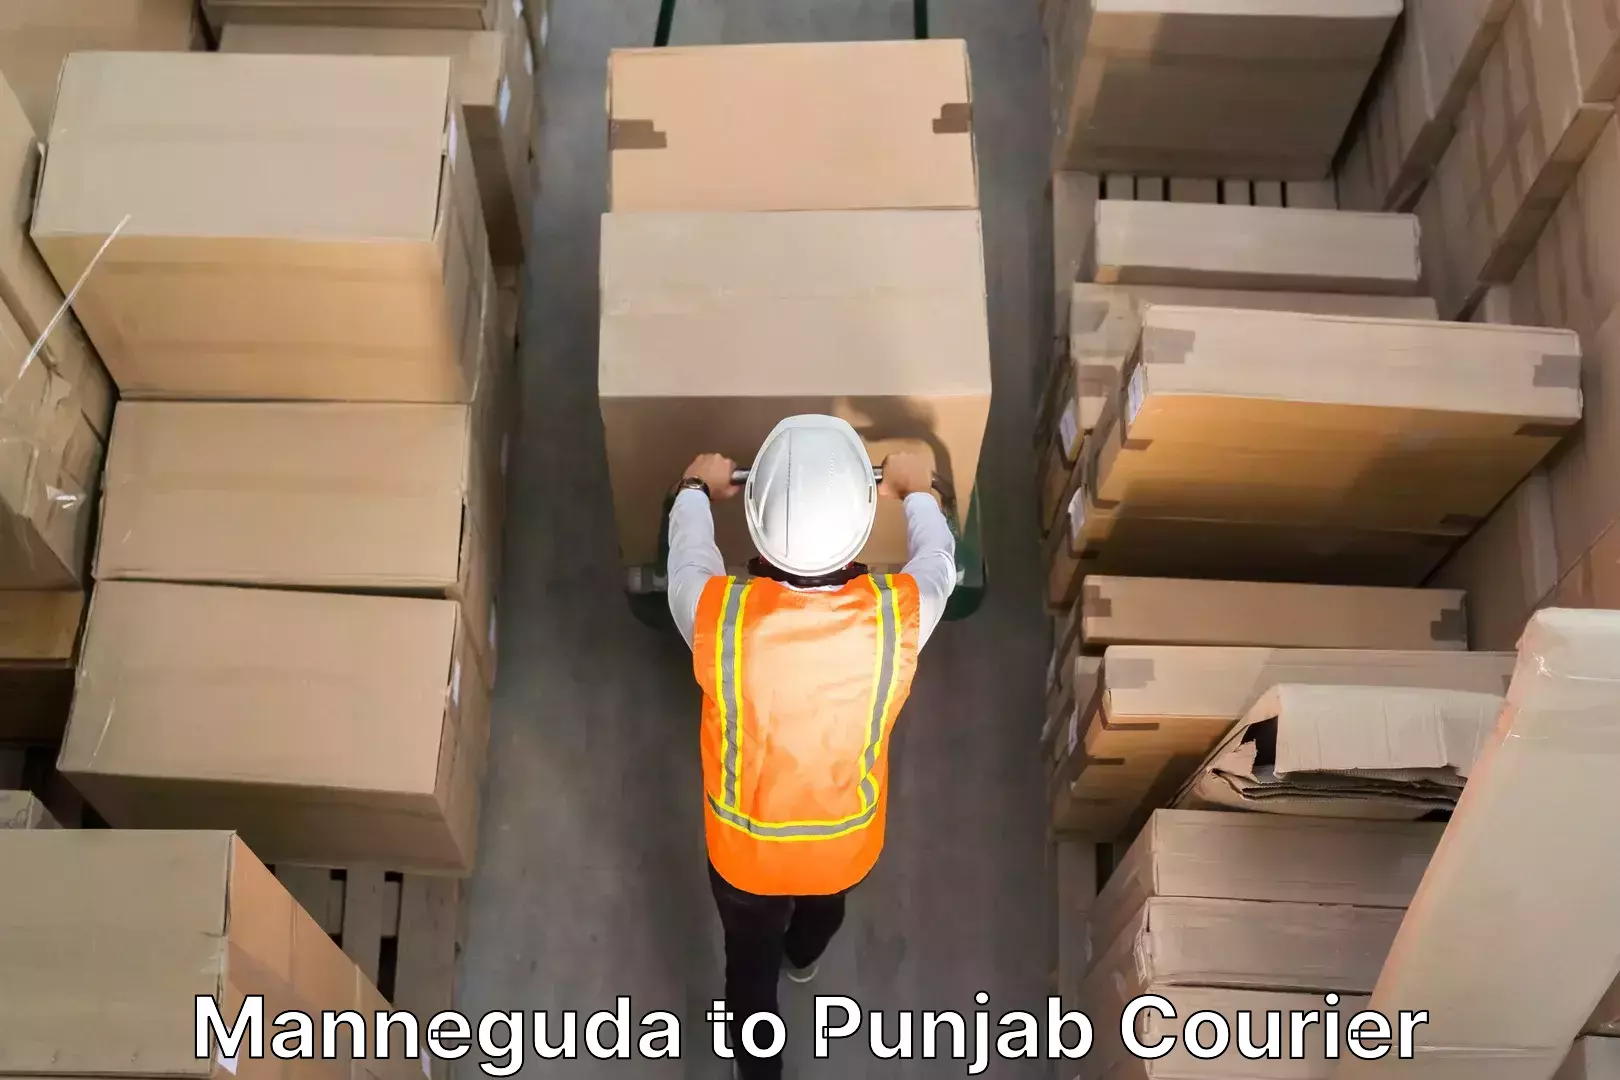 Trusted relocation experts Manneguda to Punjab